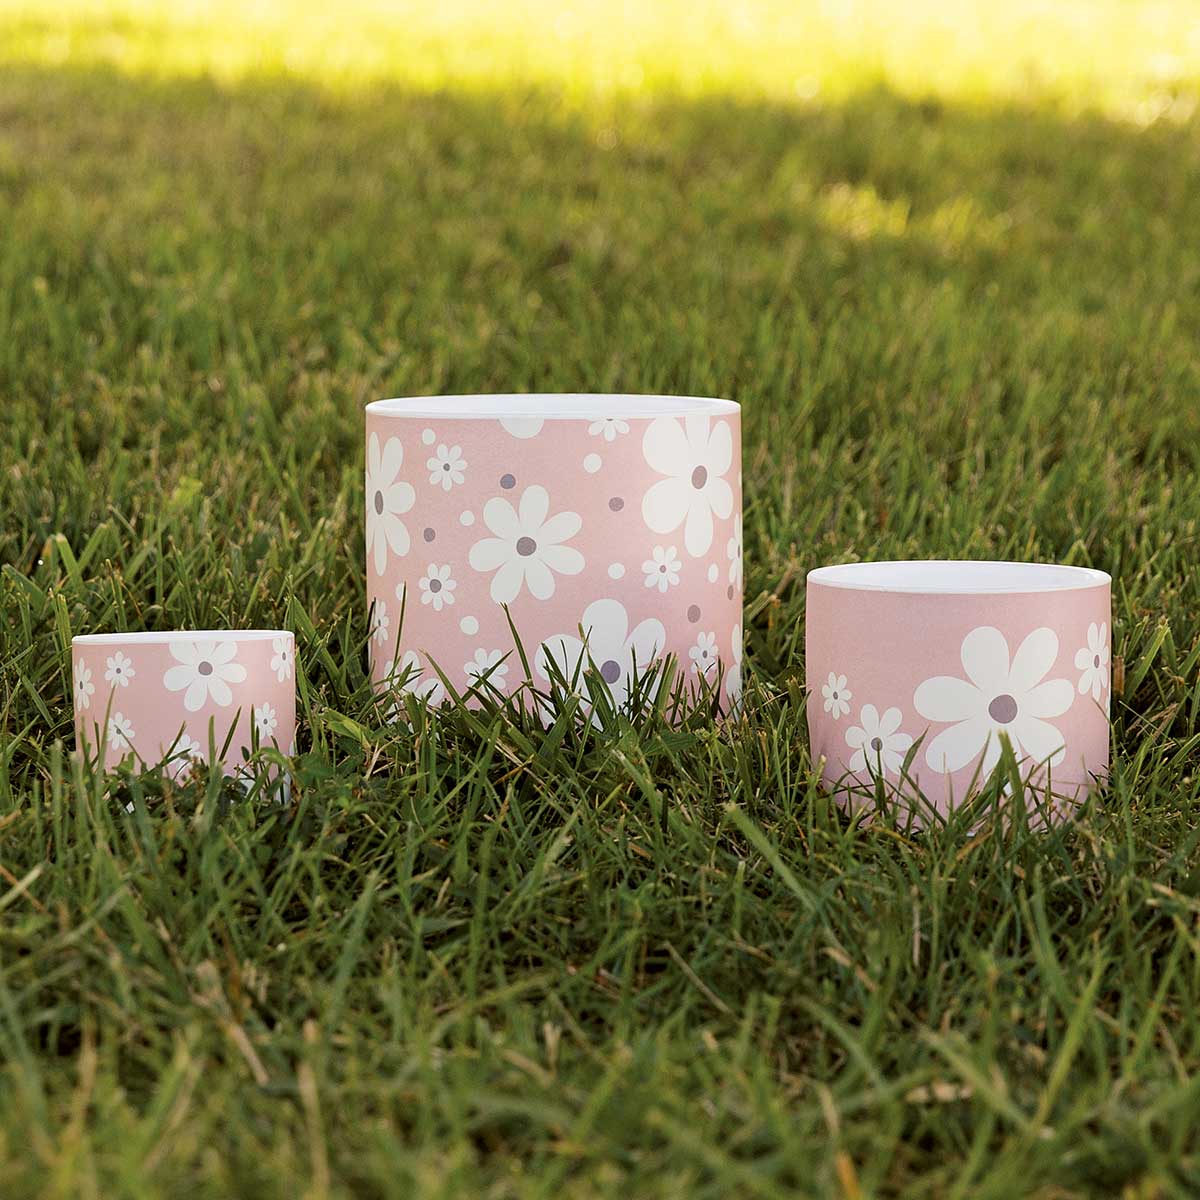 b50 POT WHOOPSIE DAISY LARGE 5.25IN X 4.75IN PINK/WHITE CERAMIC - Click Image to Close